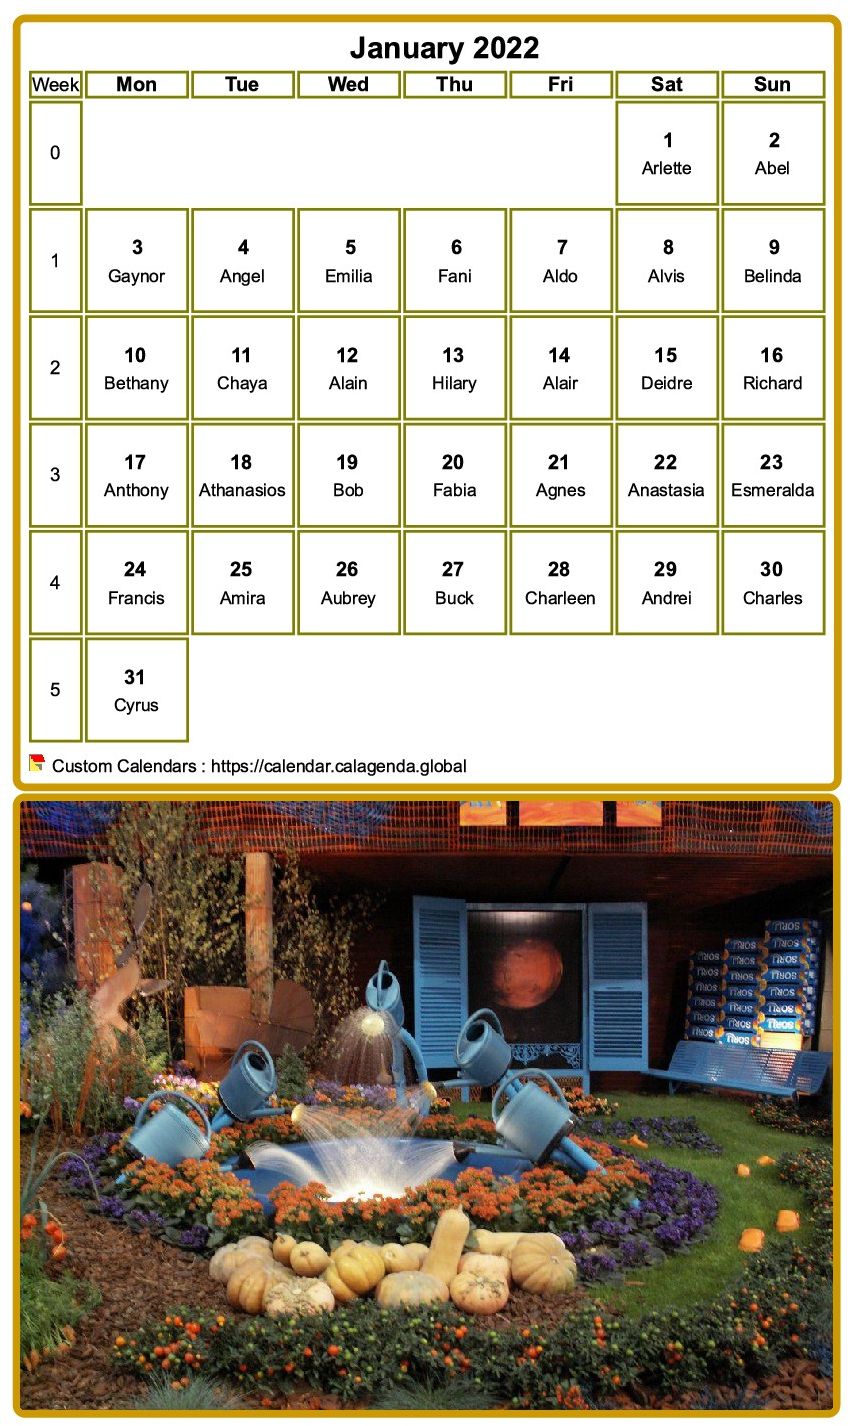 Calendar monthly 2022 to print, with photograph in underside